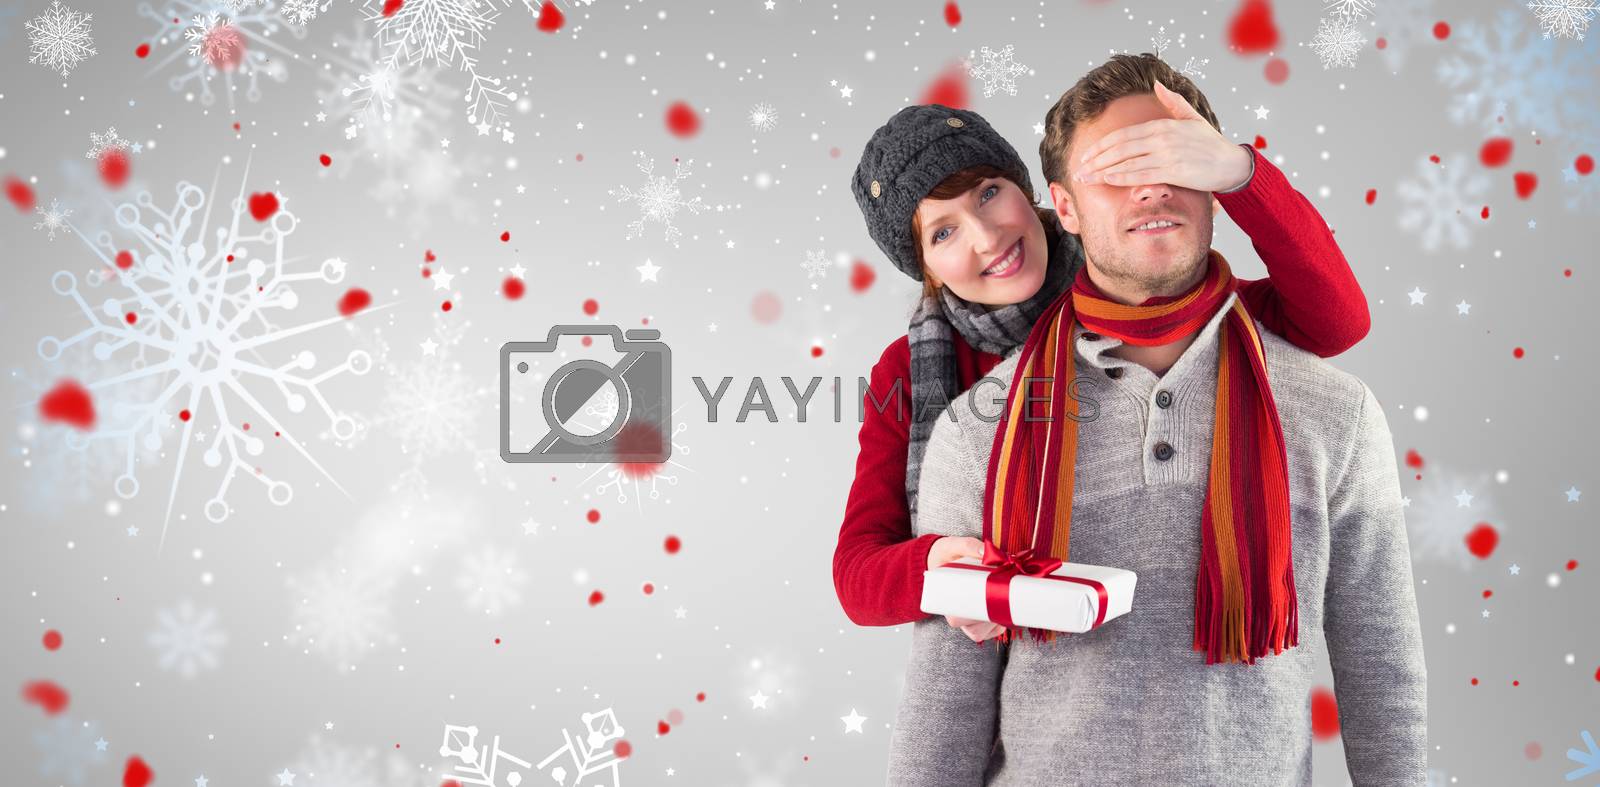 Royalty free image of Composite image of woman giving man a present by Wavebreakmedia